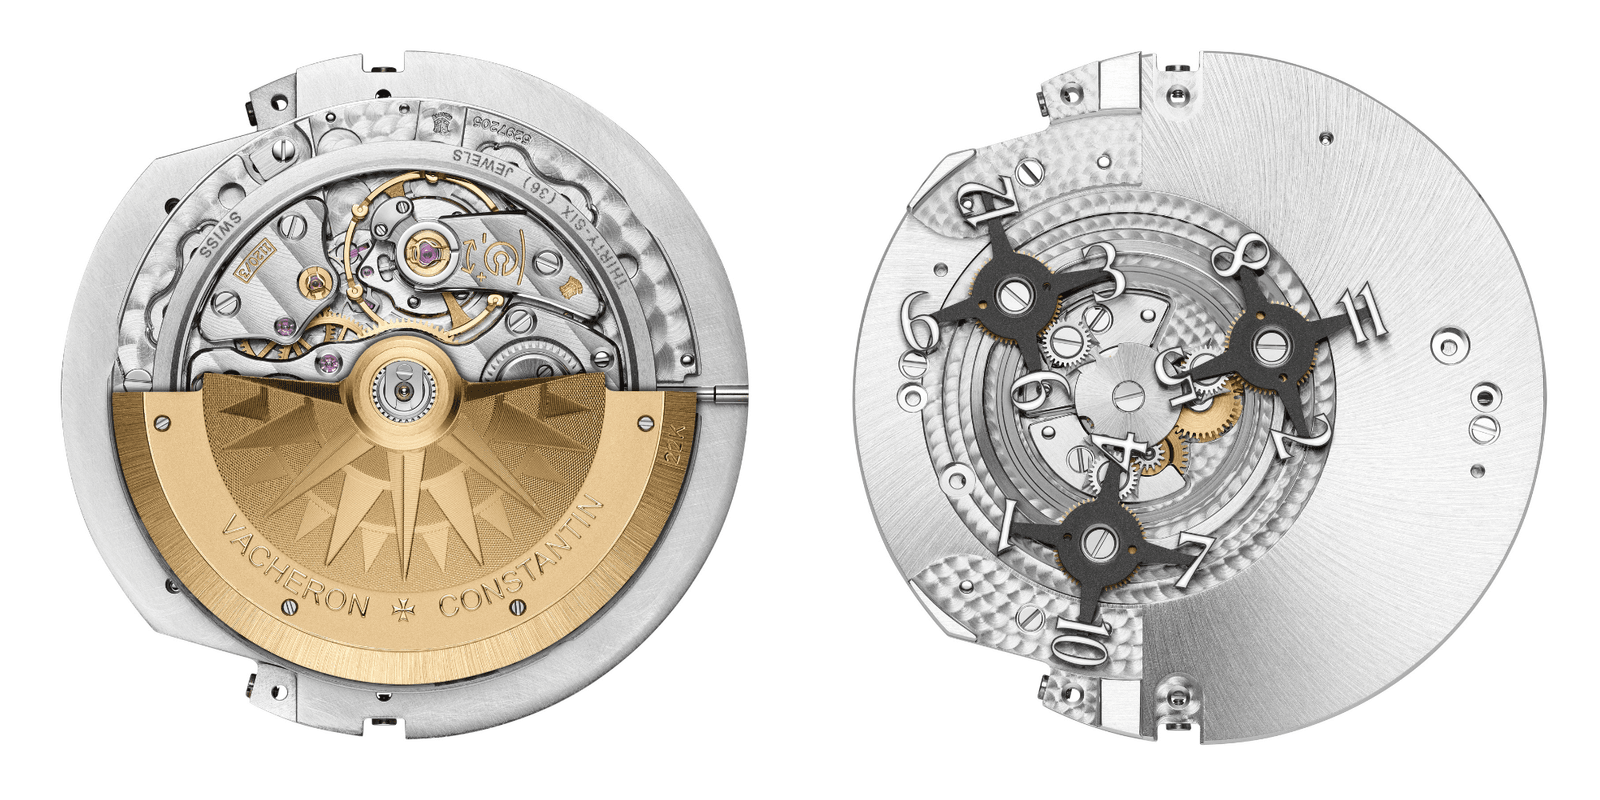 The Cal. 1120 AT/1 features a satellite module to showcase hours